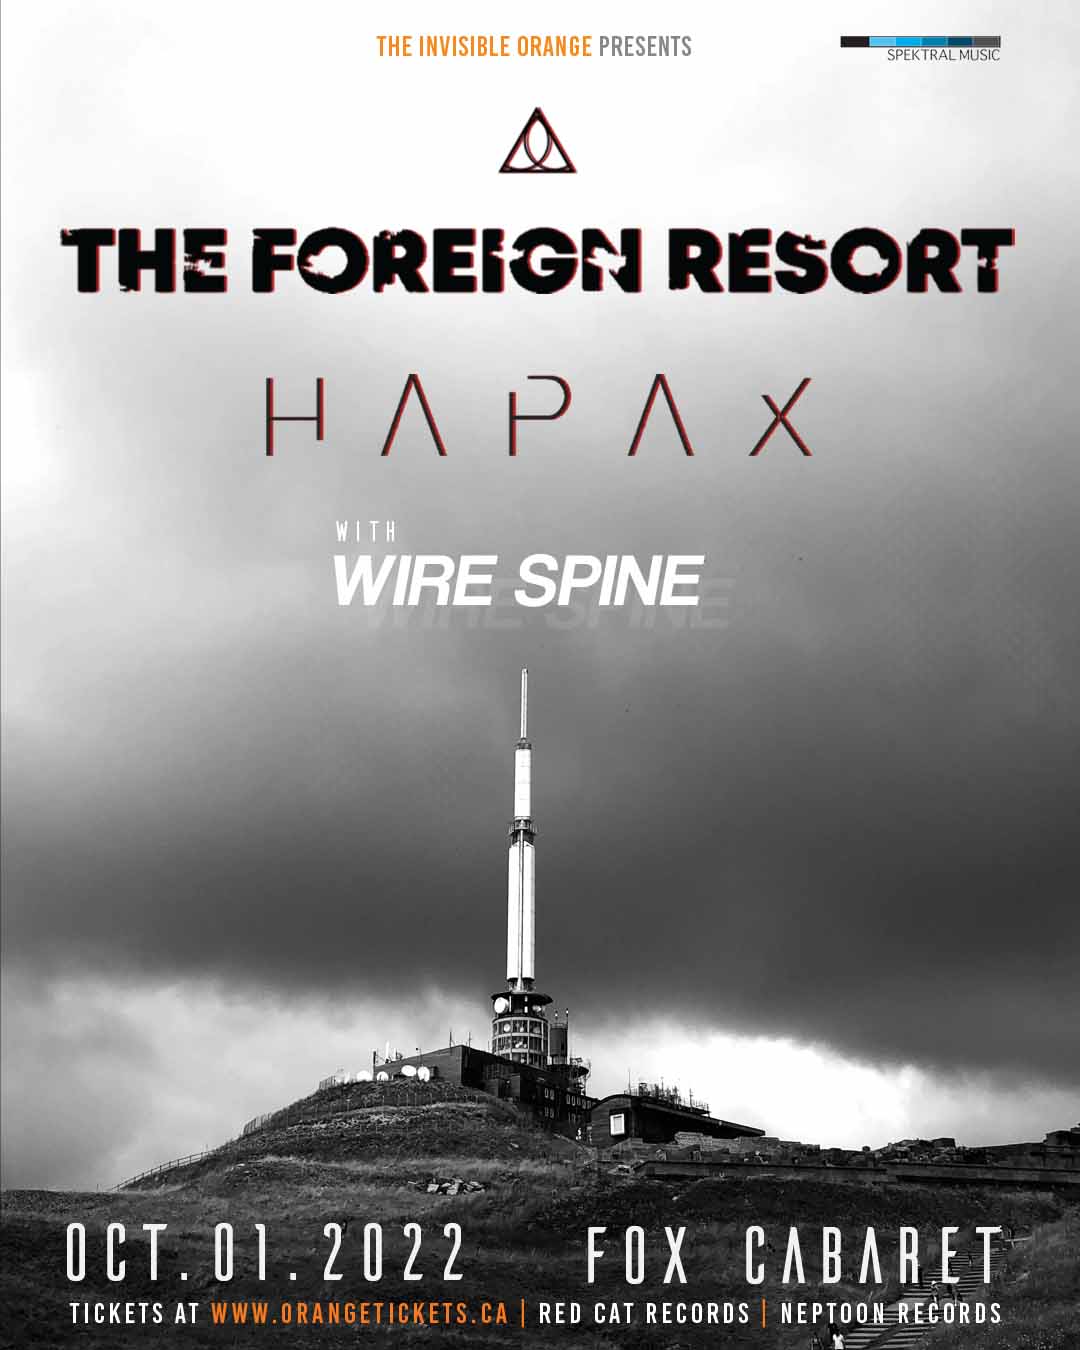 THE FOREIGN RESORT + HAPAX